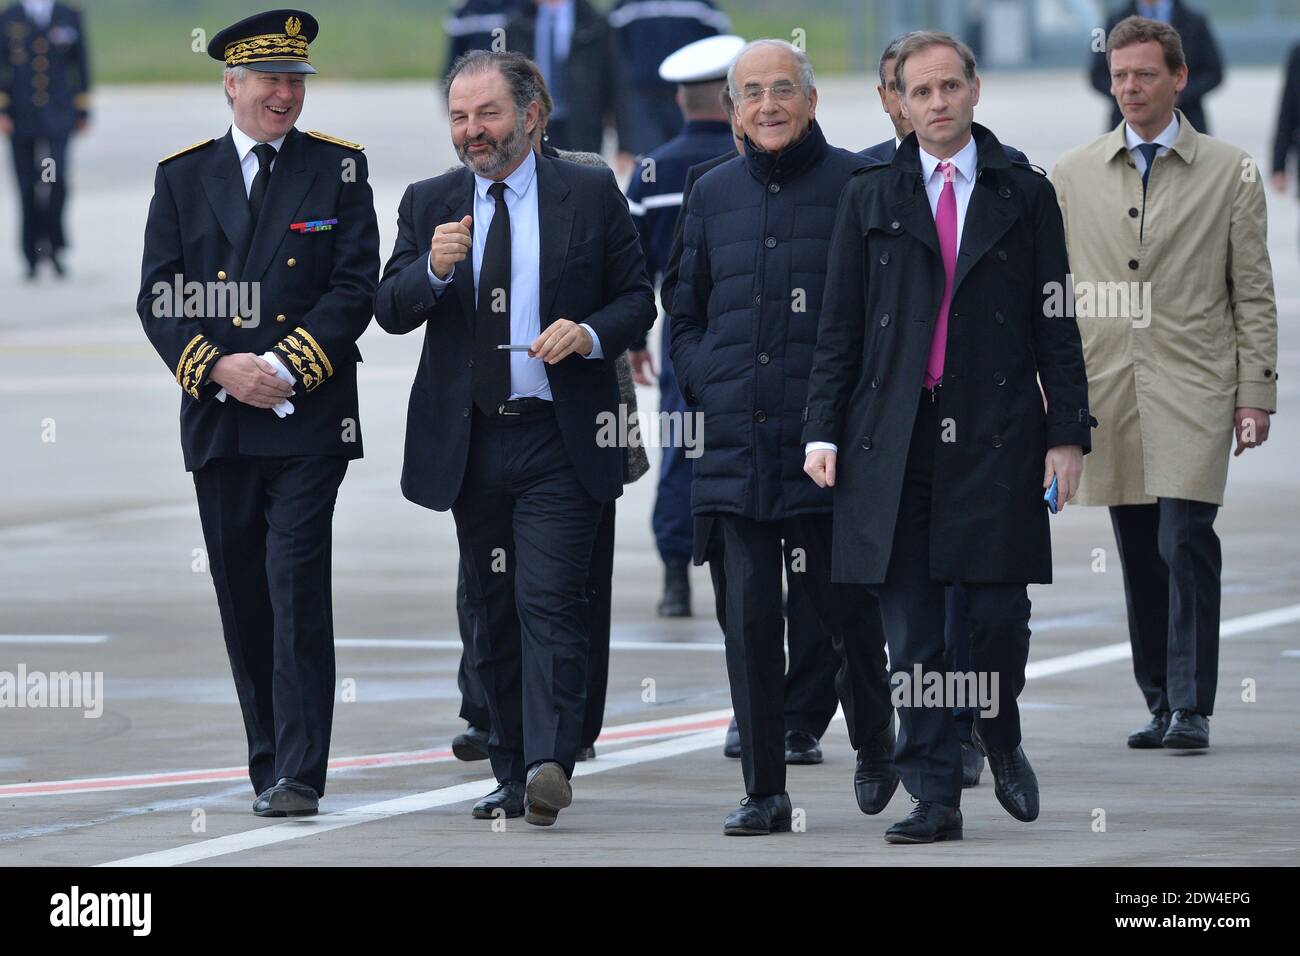 The CEO of Europe 1, Denis Olivennes, Jean Pierre Elkabbach and Fabien Namias arrive to welcome four French journalists, Edouard Elias, Didier Francois, Nicolas Henin and Pierre Torres, taken hostage in Syria last year and freed yesterday, at the Villacoublay air base southwest of Paris on April 20, 2014. They had been captured in two separate incidents in June last year while covering the conflict in Syria. Photo by Nicolas Gouhier/ABACAPRESS.COM Stock Photo